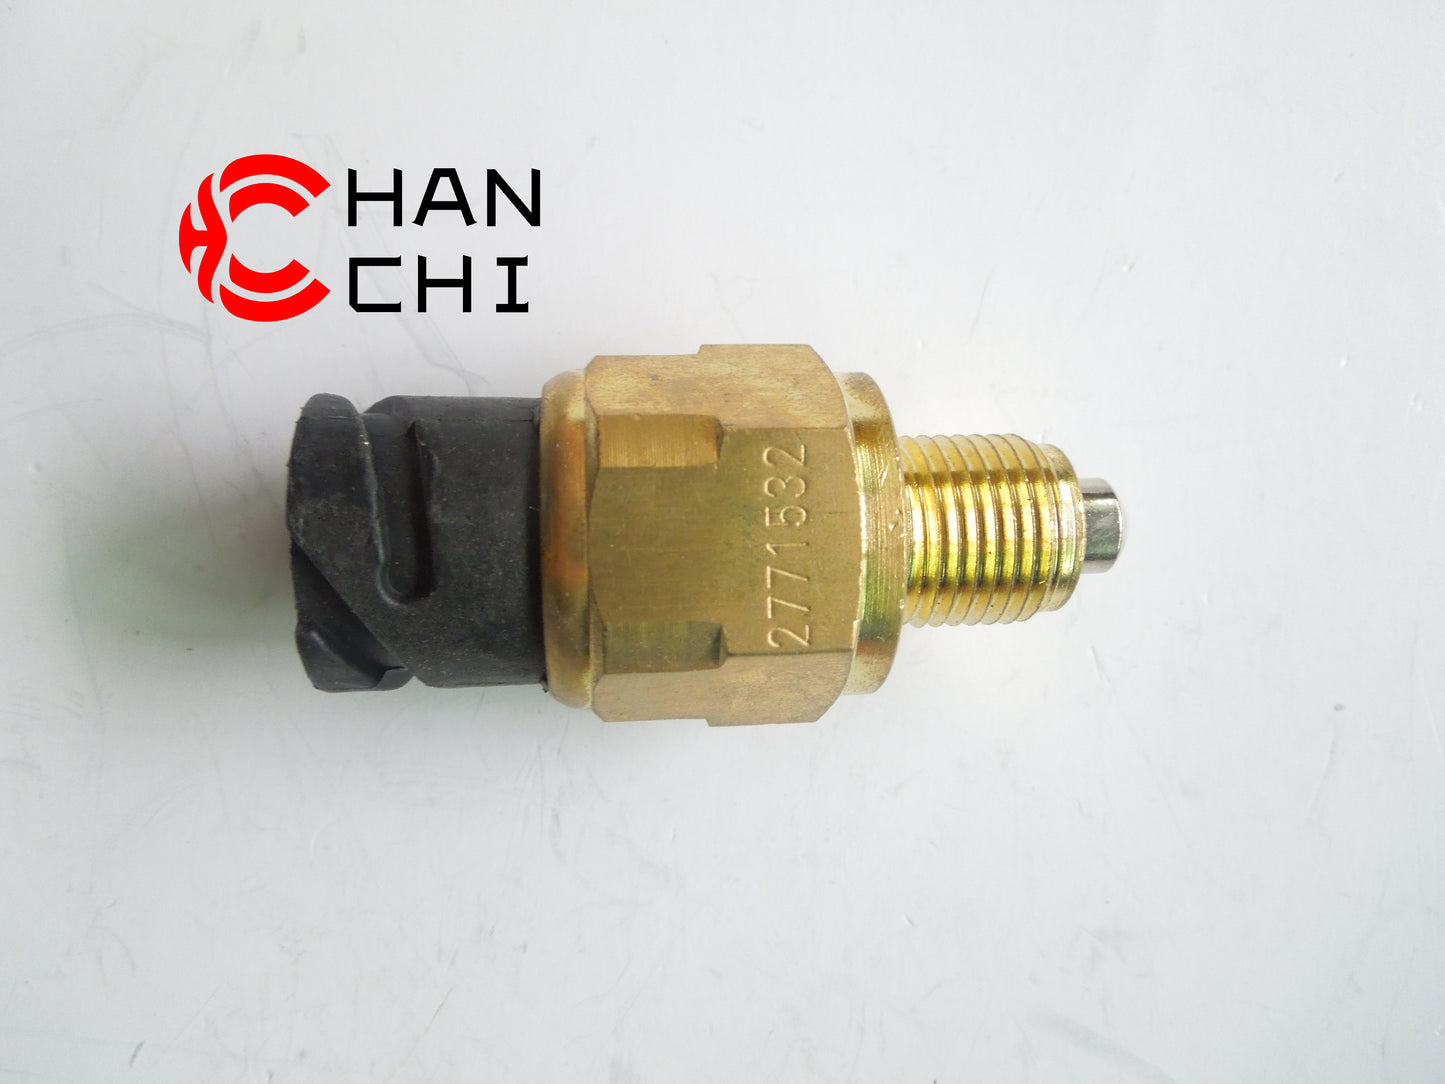 OEM: 2771532Material: metalColor: black silverOrigin: Made in ChinaWeight: 50gPacking List: 1* Reversing Light Switch More Service We can provide OEM Manufacturing service We can Be your one-step solution for Auto Parts We can provide technical scheme for you Feel Free to Contact Us, We will get back to you as soon as possible.